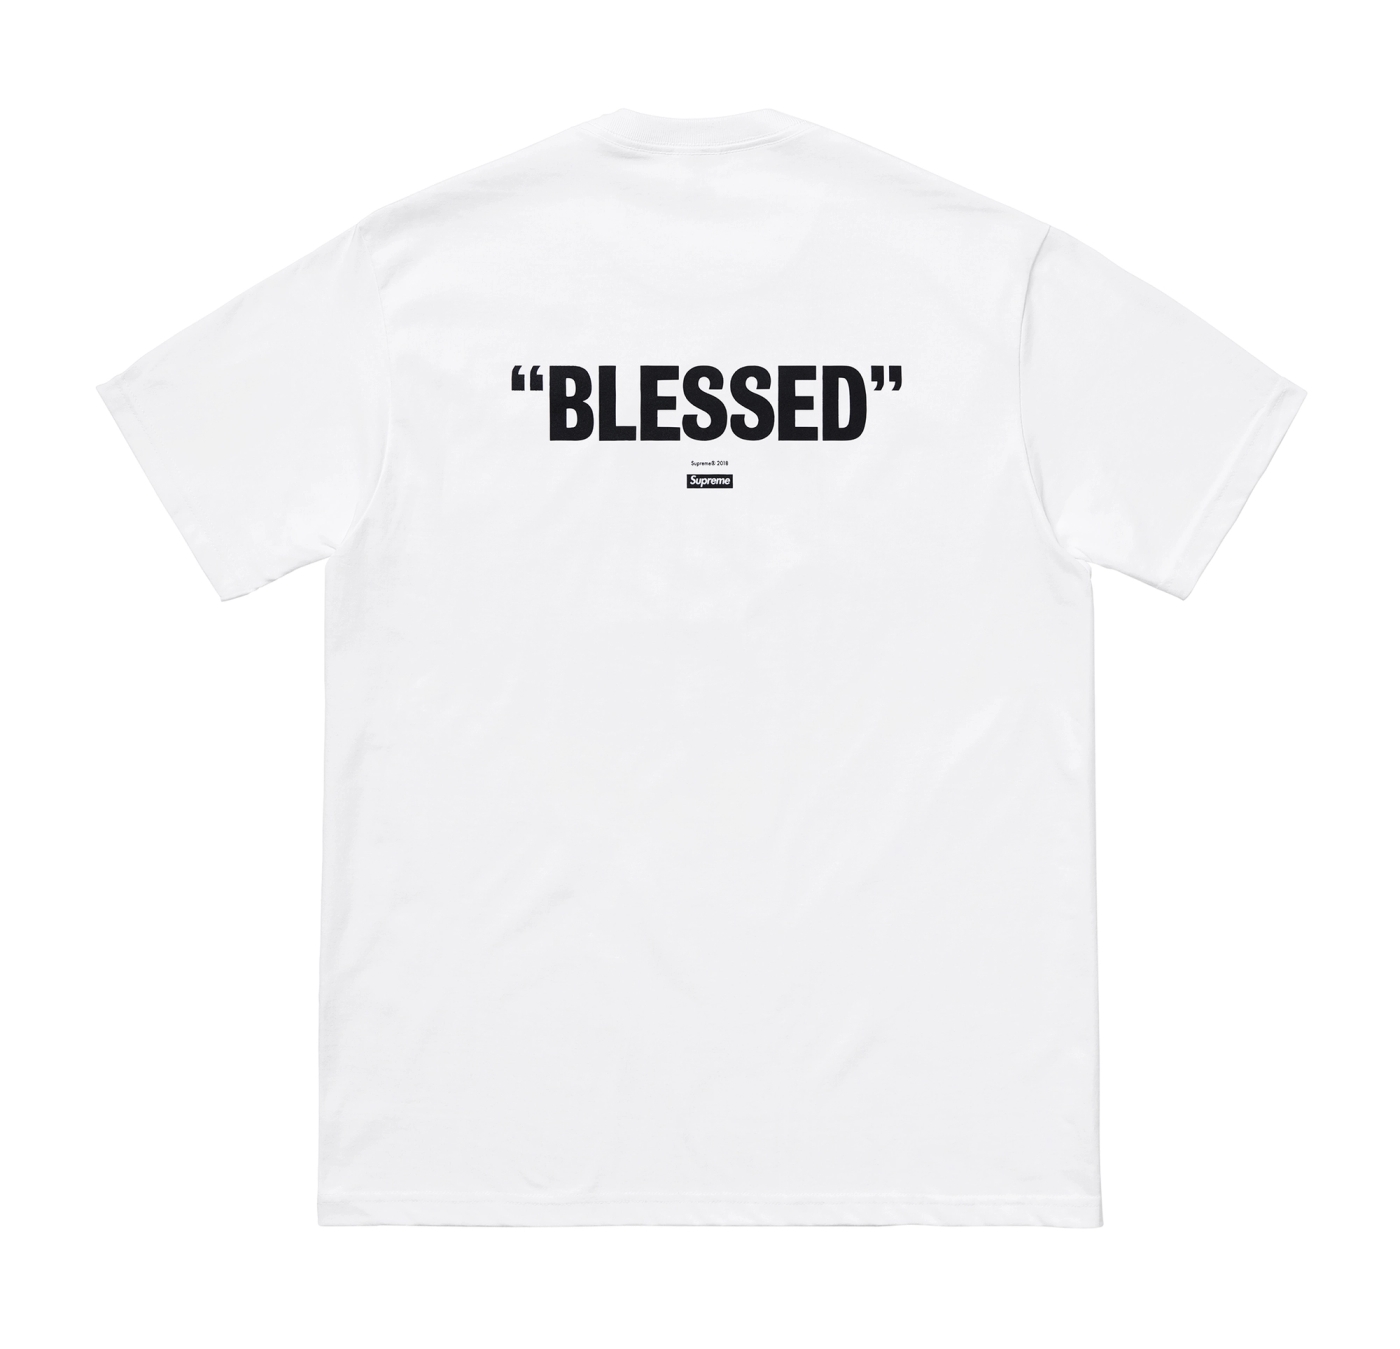 “BLESSED” (6) (6/6)